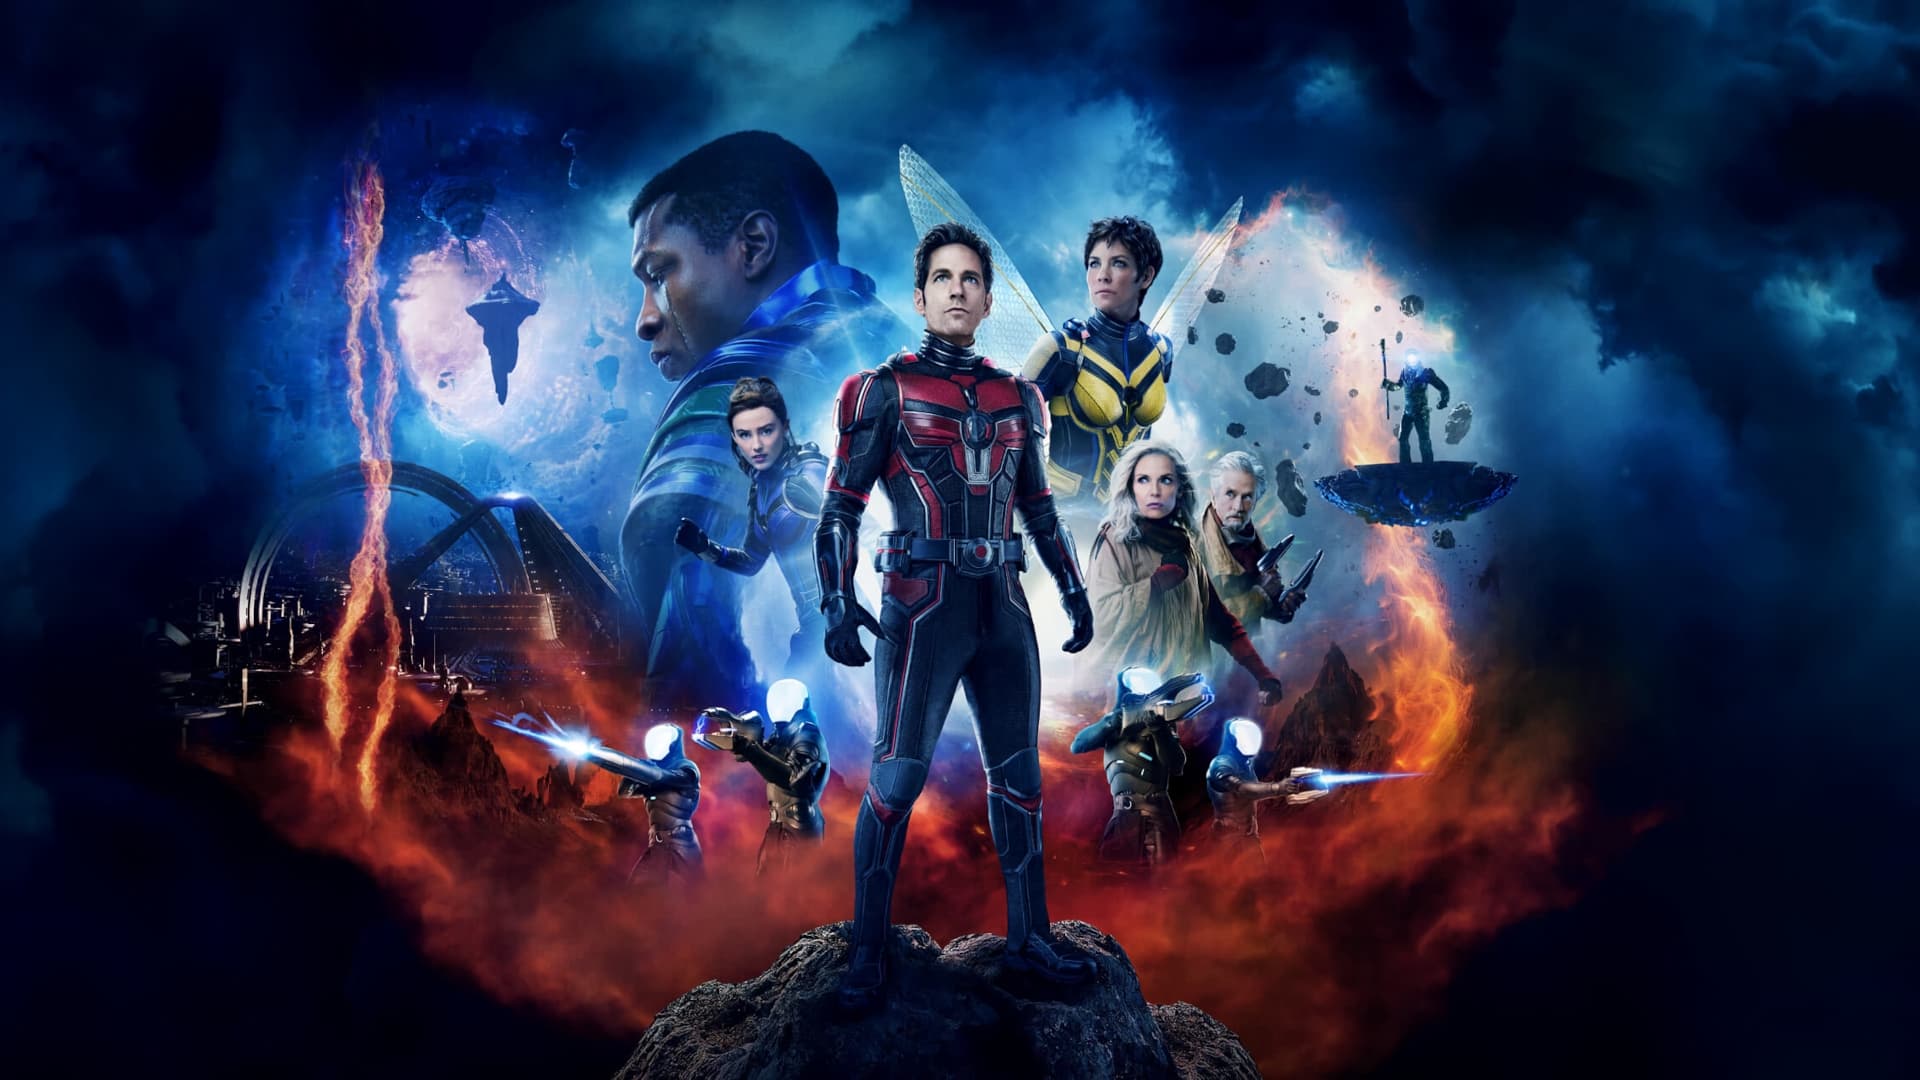 Ant-Man and the Wasp: Quantumania 2023 123movies